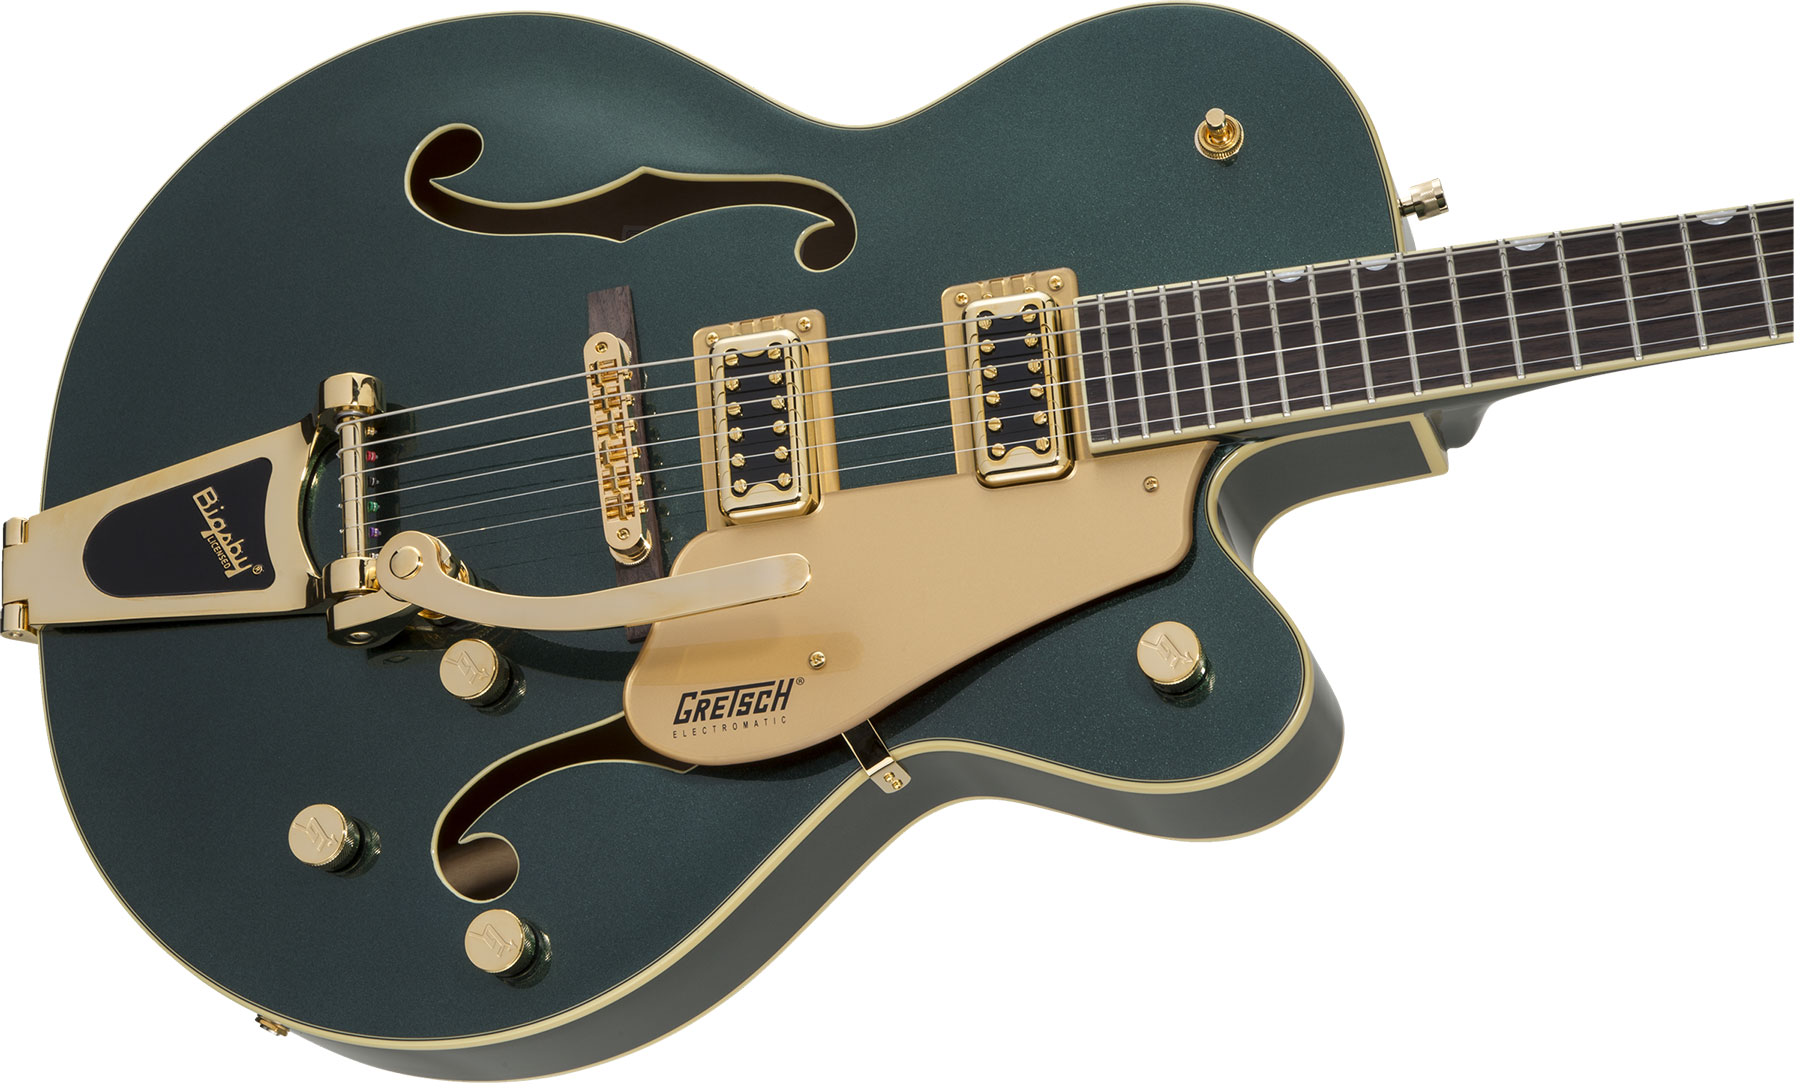 Gretsch G5420tg Electromatic Hollow Body Ltd Bigsby Rw - Cadillac Green - Guitare Électrique 3/4 Caisse & Jazz - Variation 2